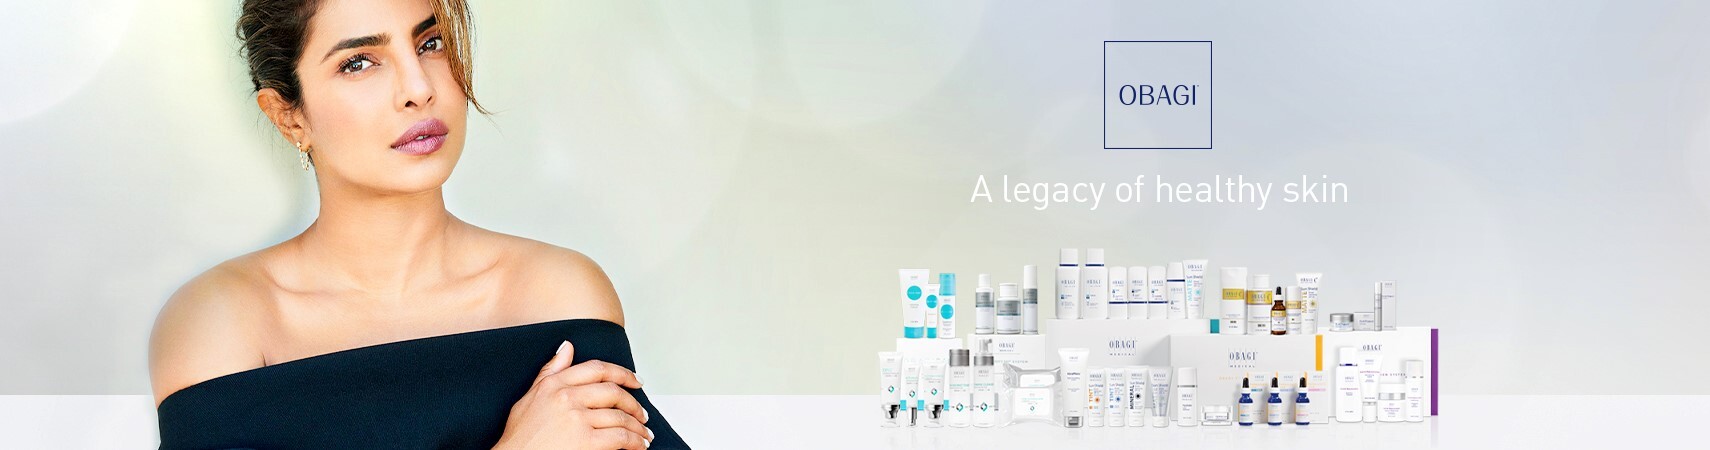 Buy Obagi Skin care Products Online in UAE @ Aesthetic Today